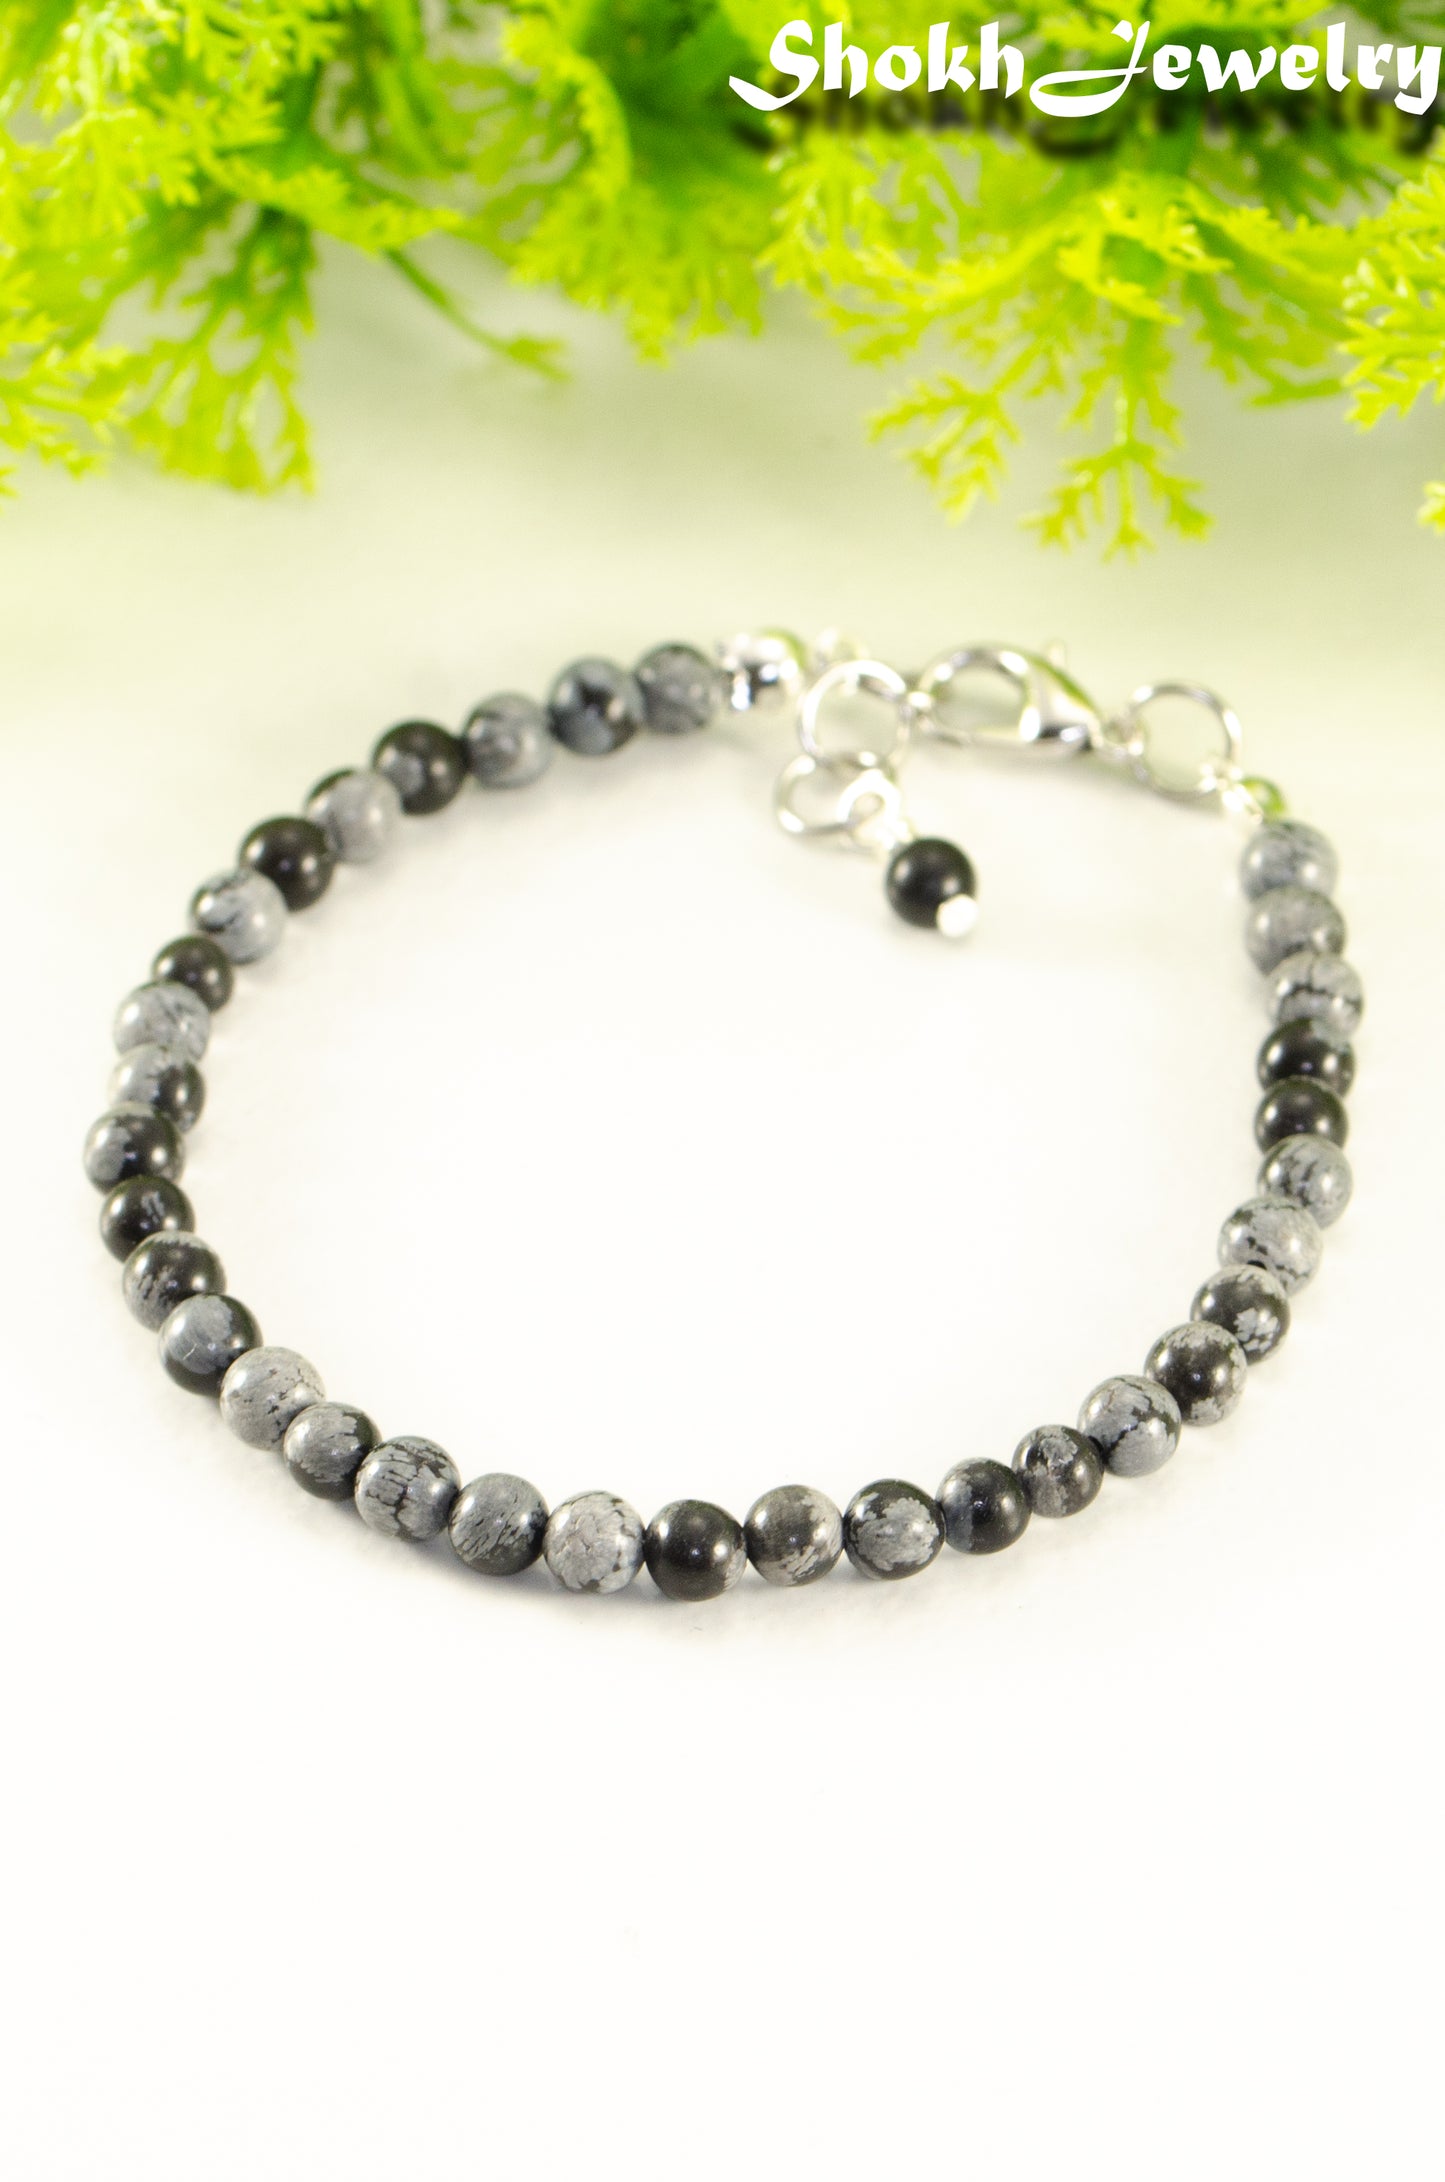 Close up of 4mm Snowflake Obsidian Stone Bracelet with Clasp.